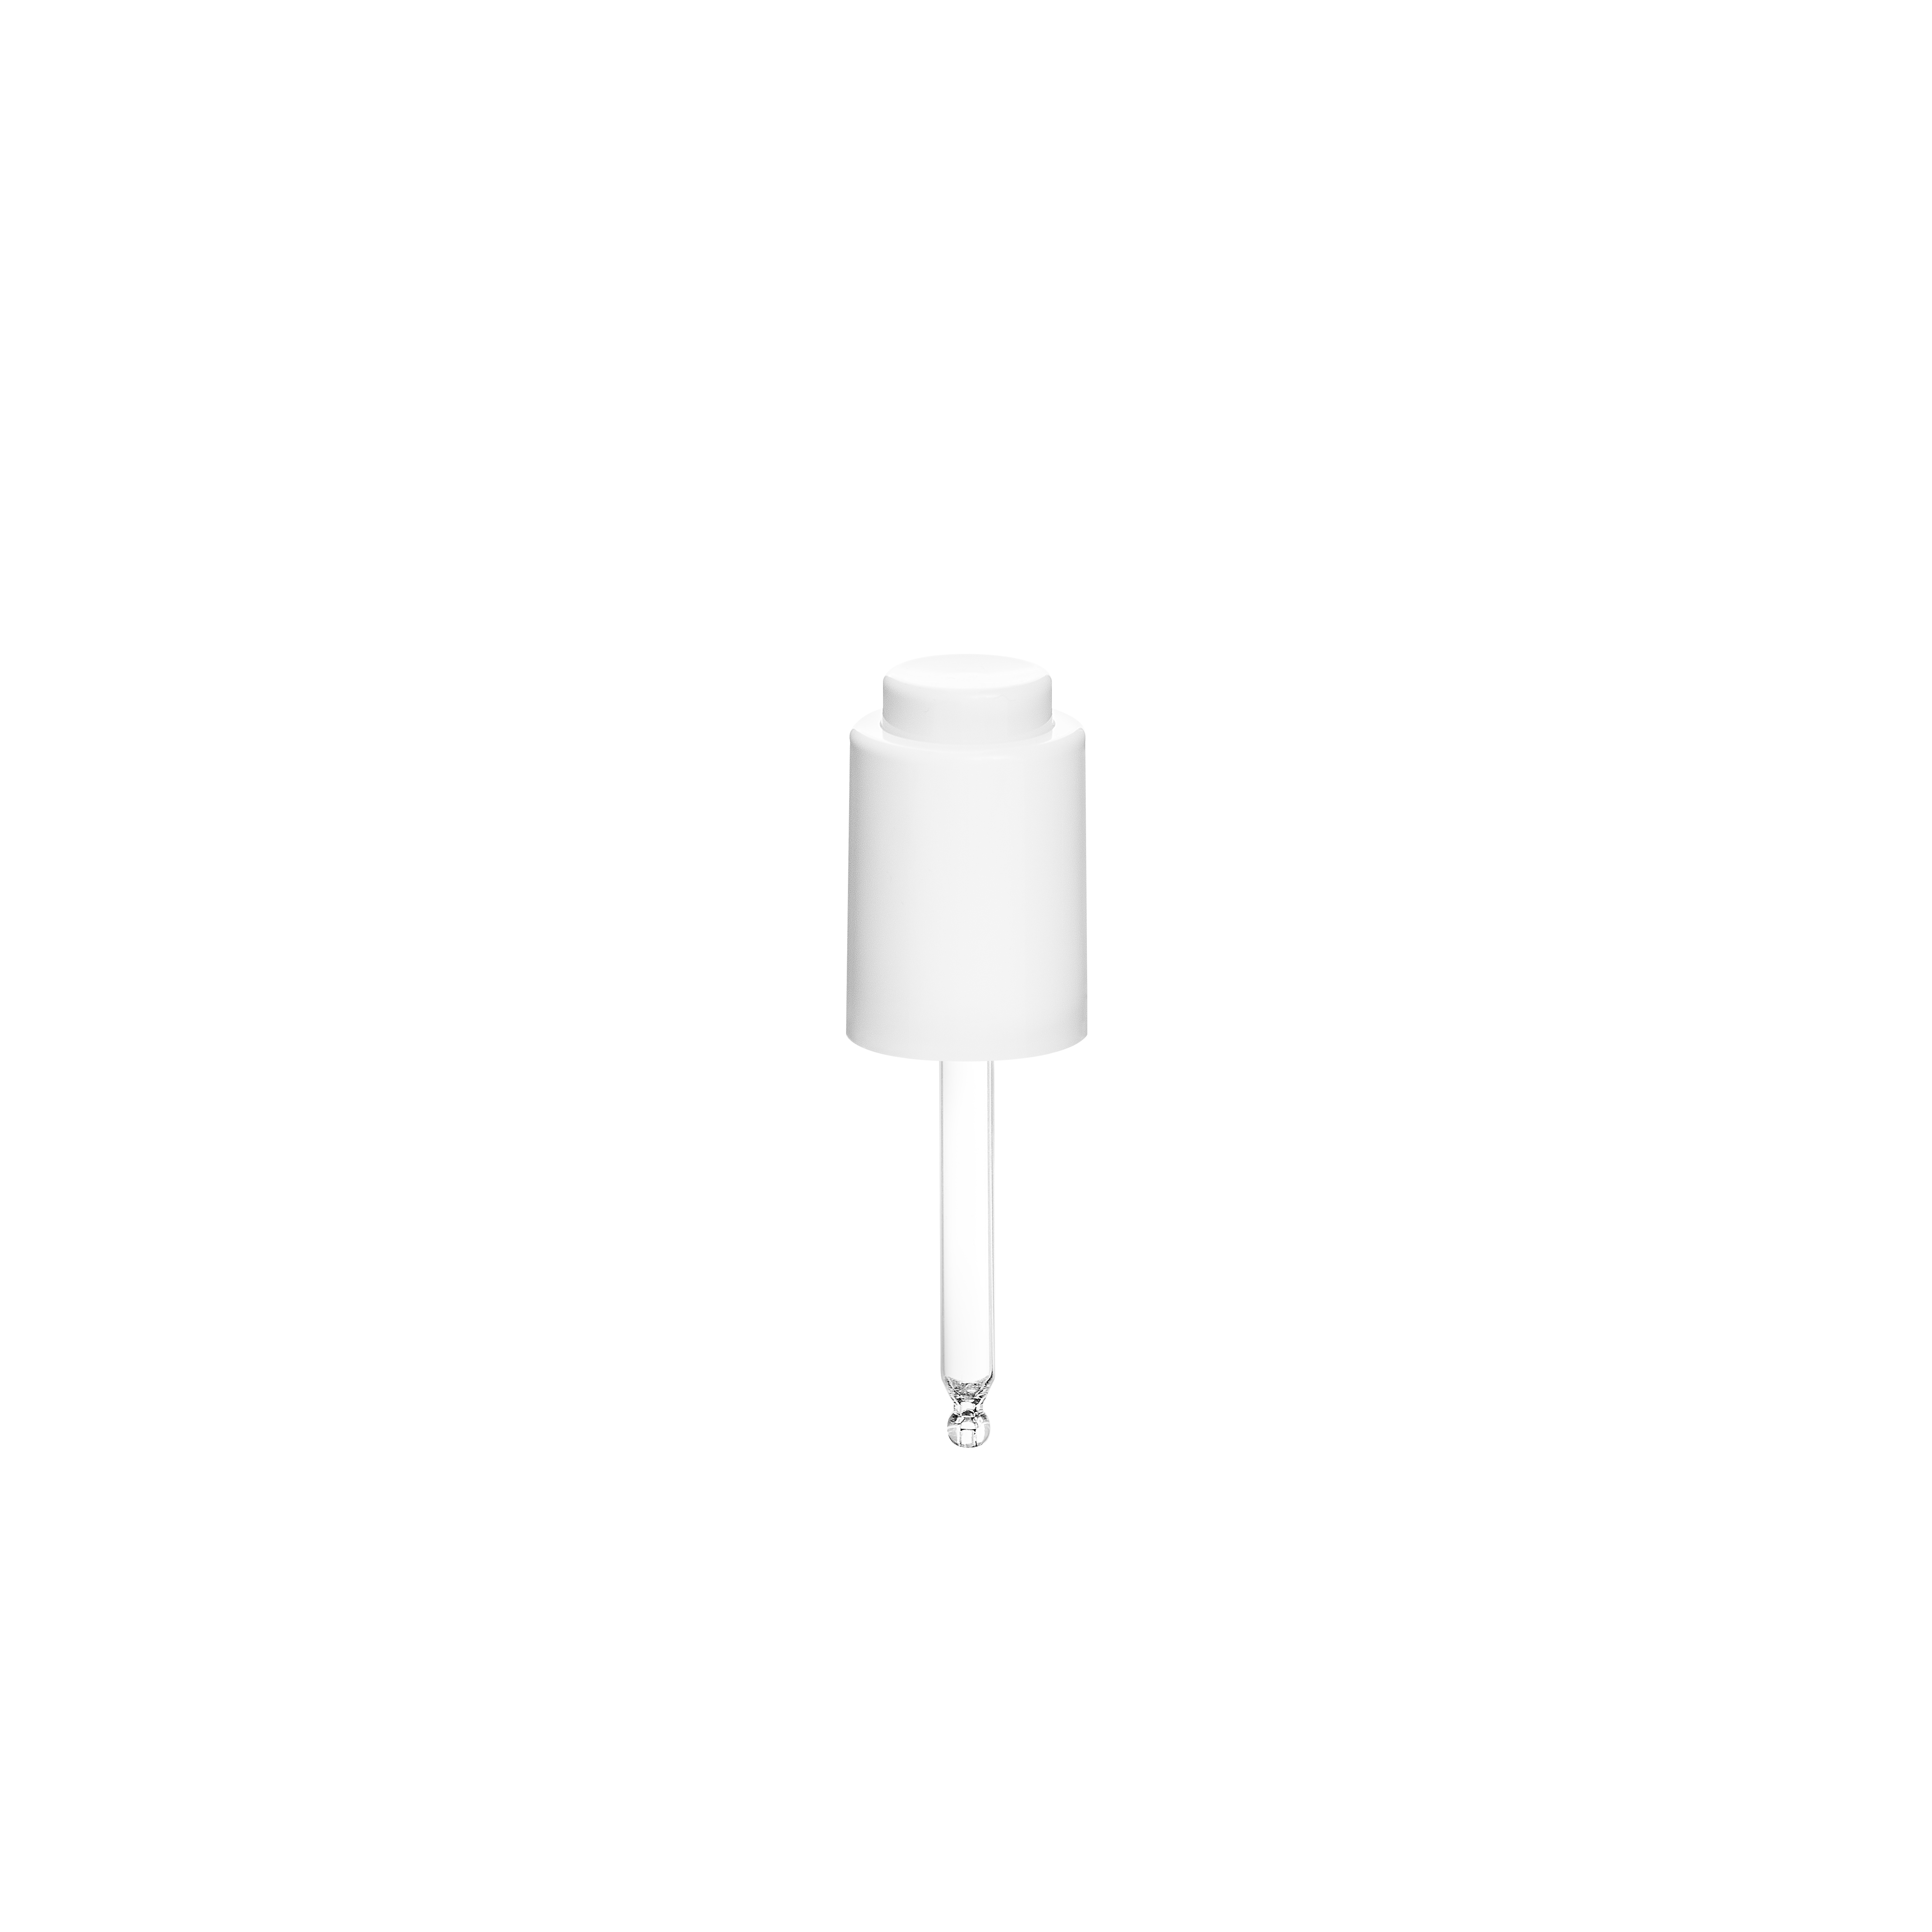 Push-button pipette 18/415 thread, PP/ABS, white glossy finish, white button bulb Nitrile 0.4 ml, ball tip, straight for Laurel 30 ml